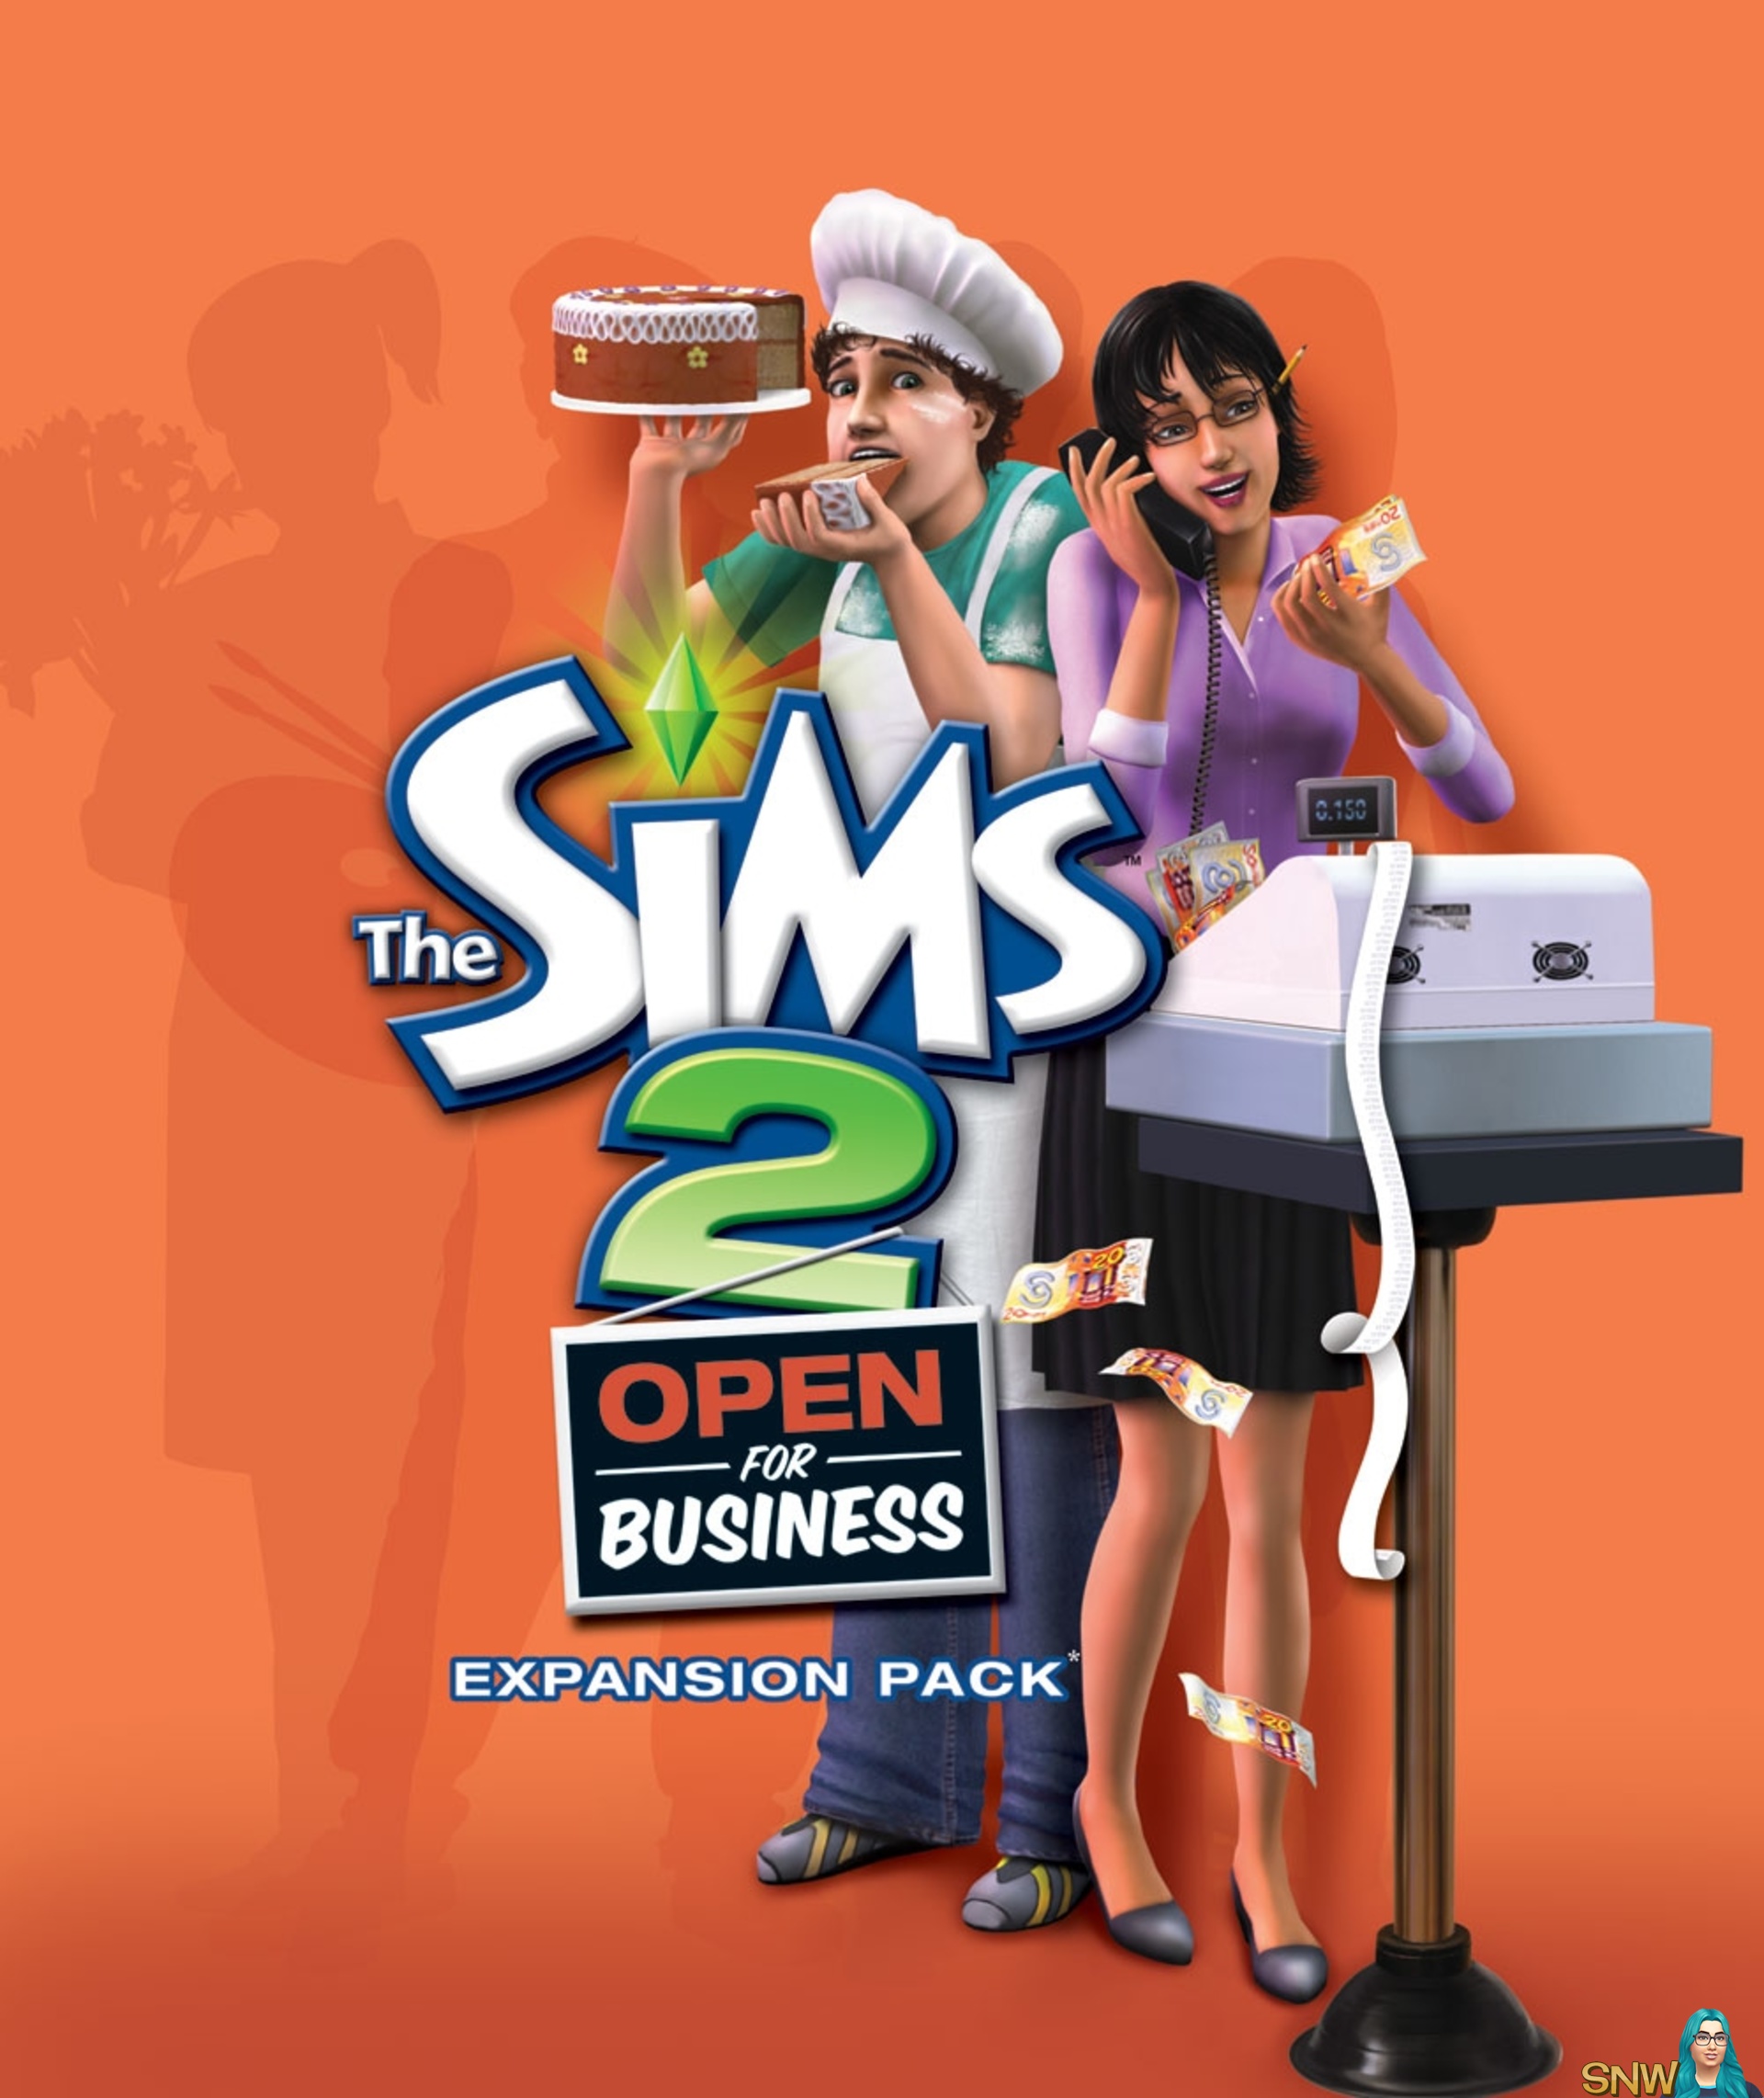 the-sims-2-open-for-business-snw-sporenetwork